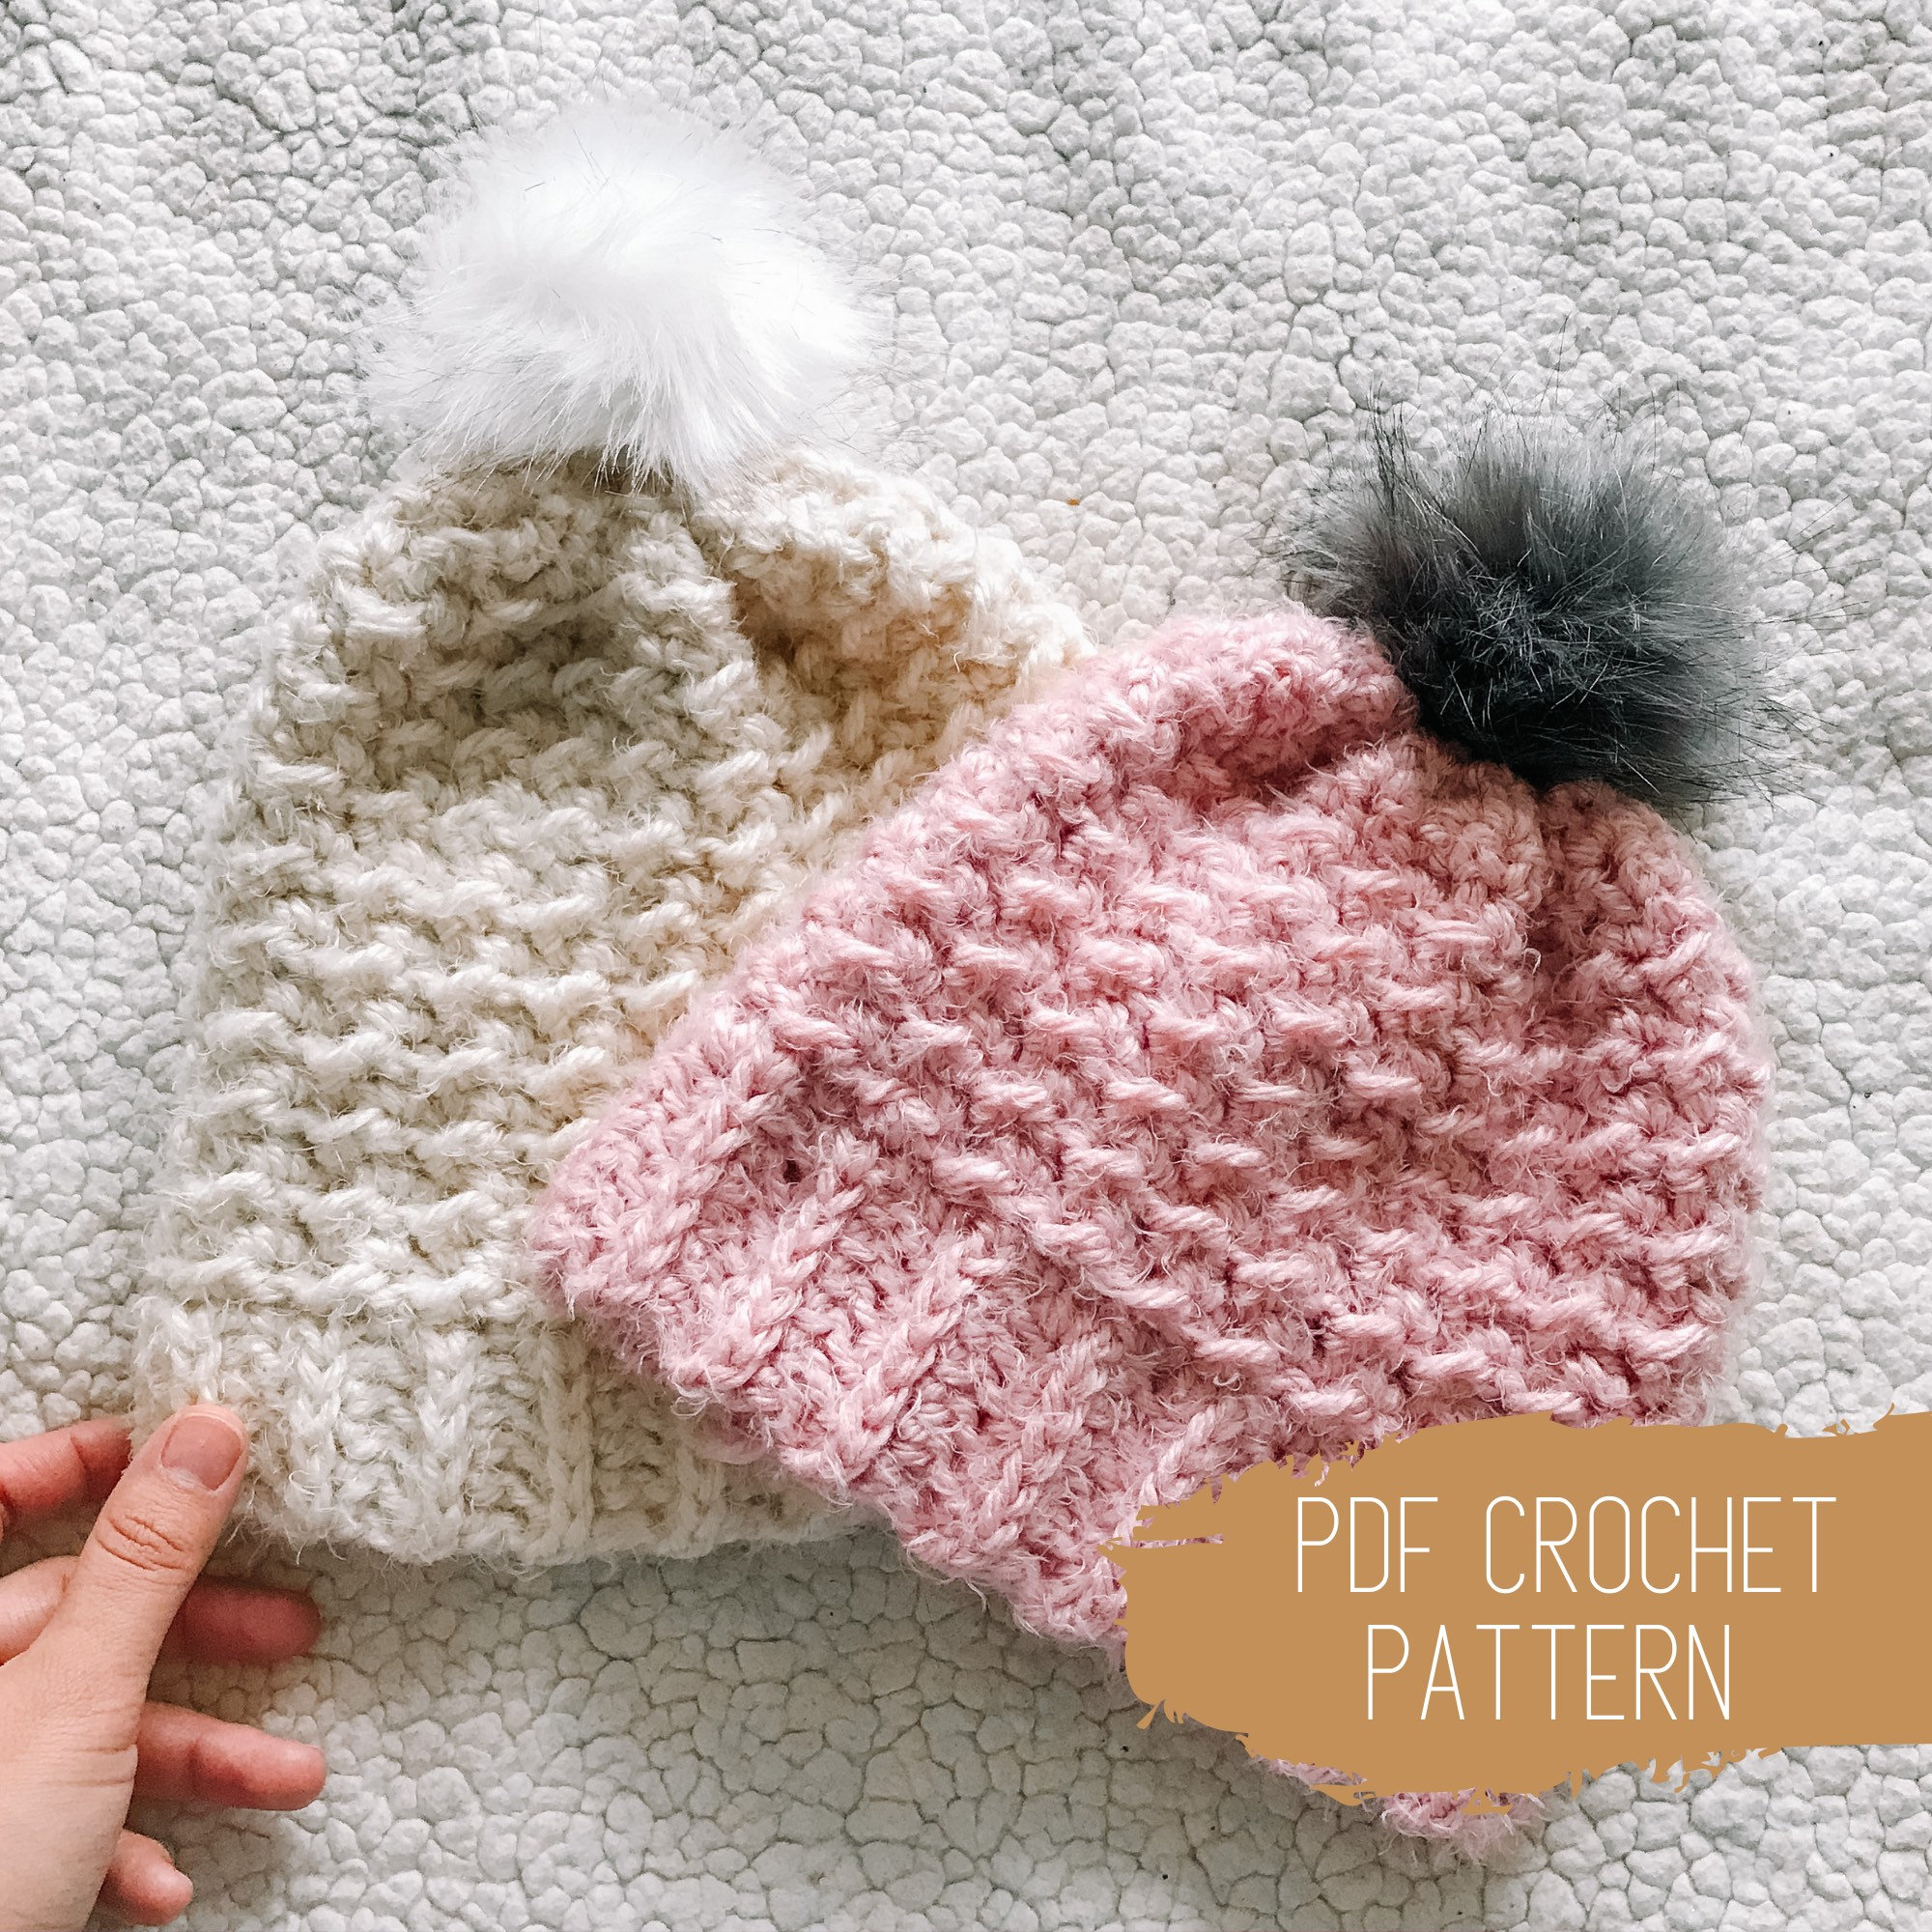 An Easy Beanie Crochet Pattern You Can Make For The Whole Family